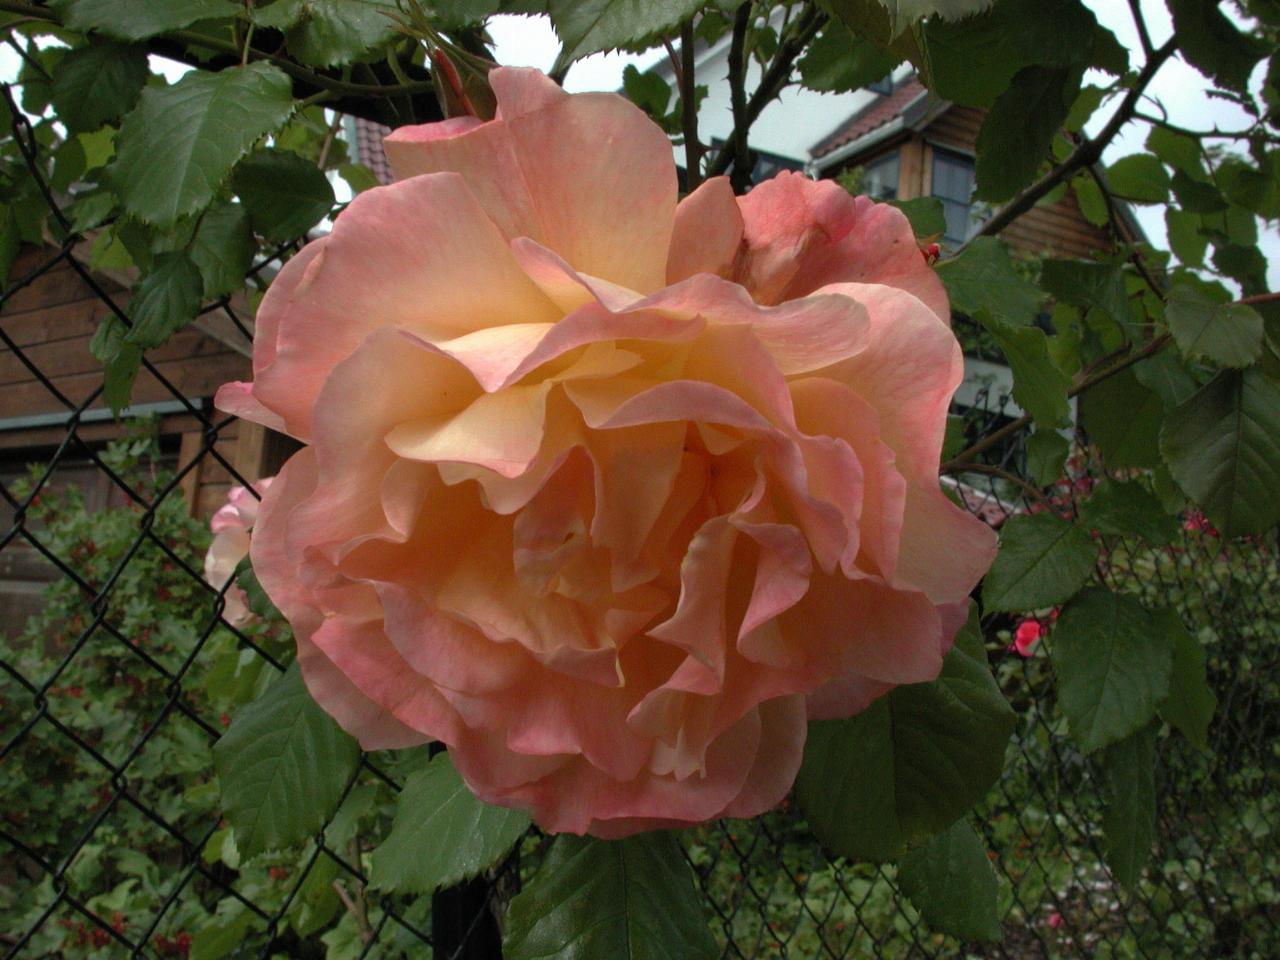 KPLU Viking Jazz: One of the beautiful roses in Molde - people used to trade cuttings to spread them around